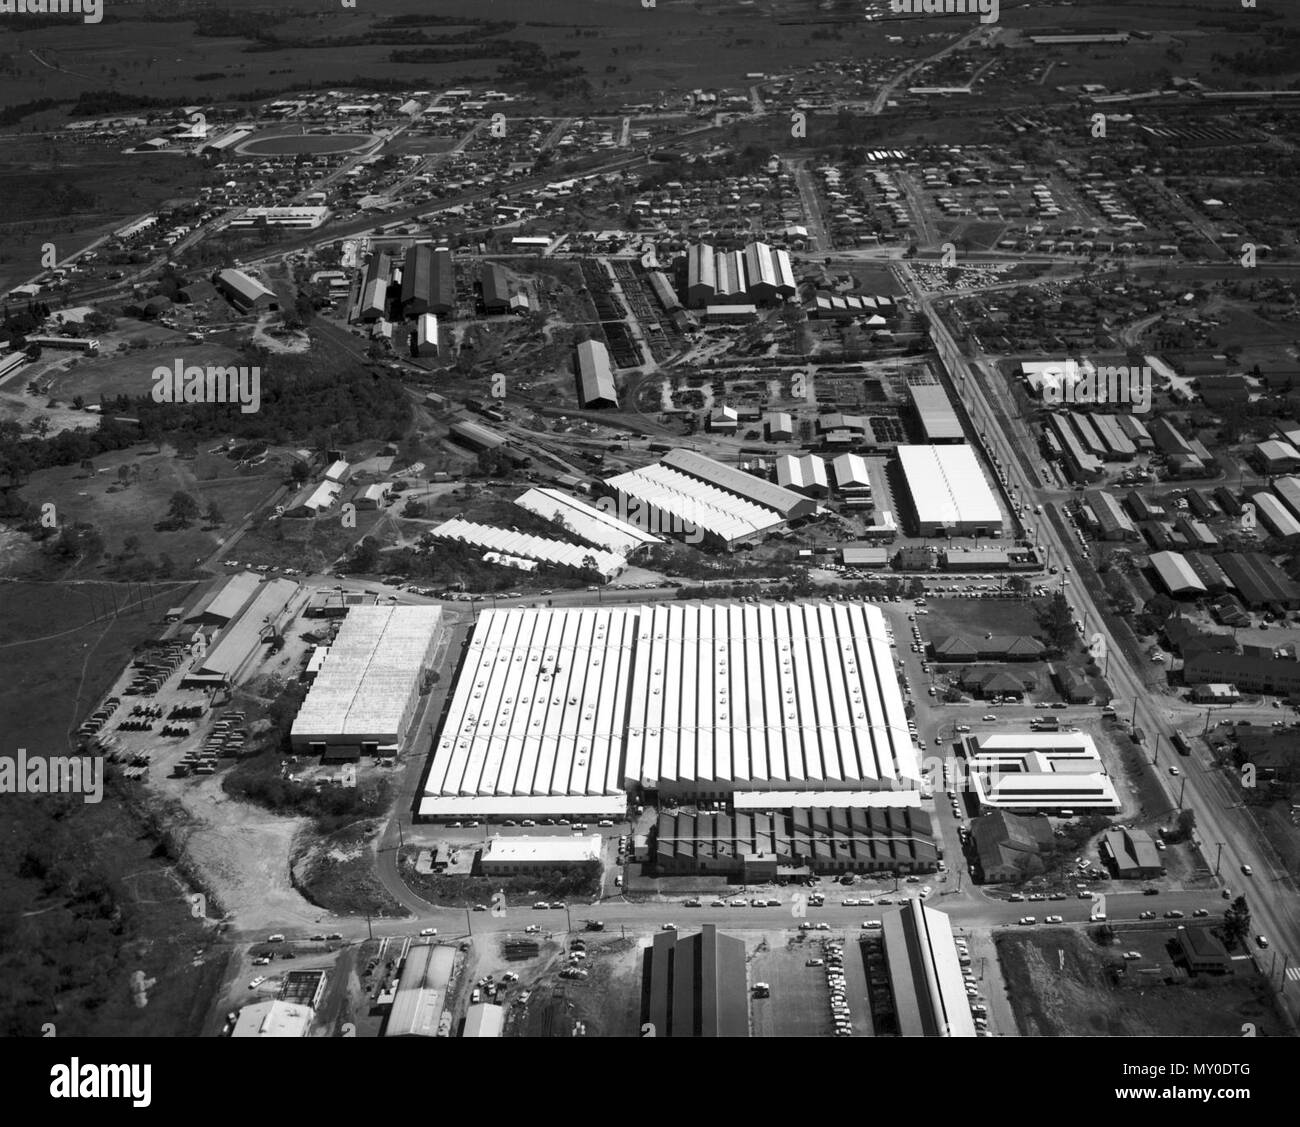 Rocklea Industrial Area, April 1965. The Courier-Mail 8 April 1954  INDUSTRIAL SITES DEMAND. Southern firms set up offices and factories (  )   A BIG demand for industrial sites in and around Brisbane has been made in recent weeks by large southern industries and manufacturing firms.  Sydney and Melbourne firms which formerly had only a representative in Brisbane are now setting up branch offices, storage rooms, and, in some cases, factories. Real estate agents reported yesterday that already several sales of small sites had been made, while other firms had placed orders for suitable sites.  M Stock Photo